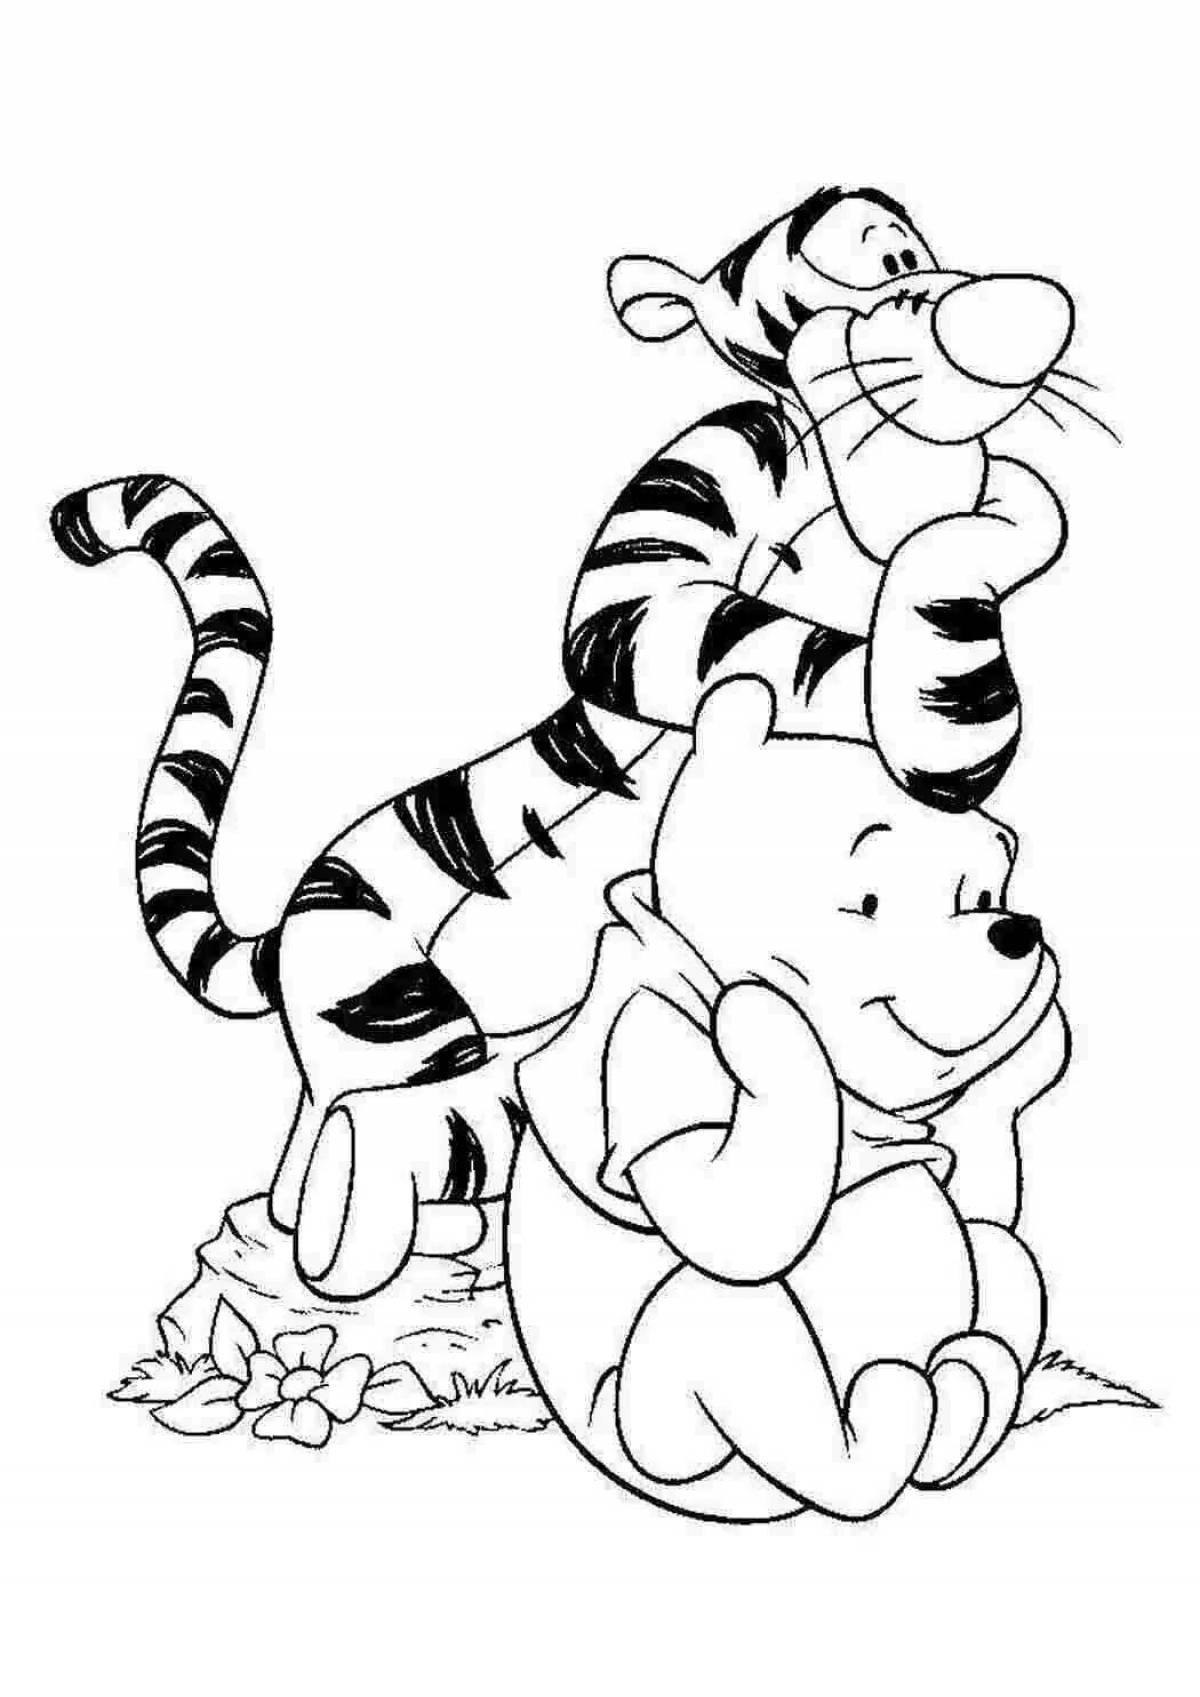 Clear coloring page from photo